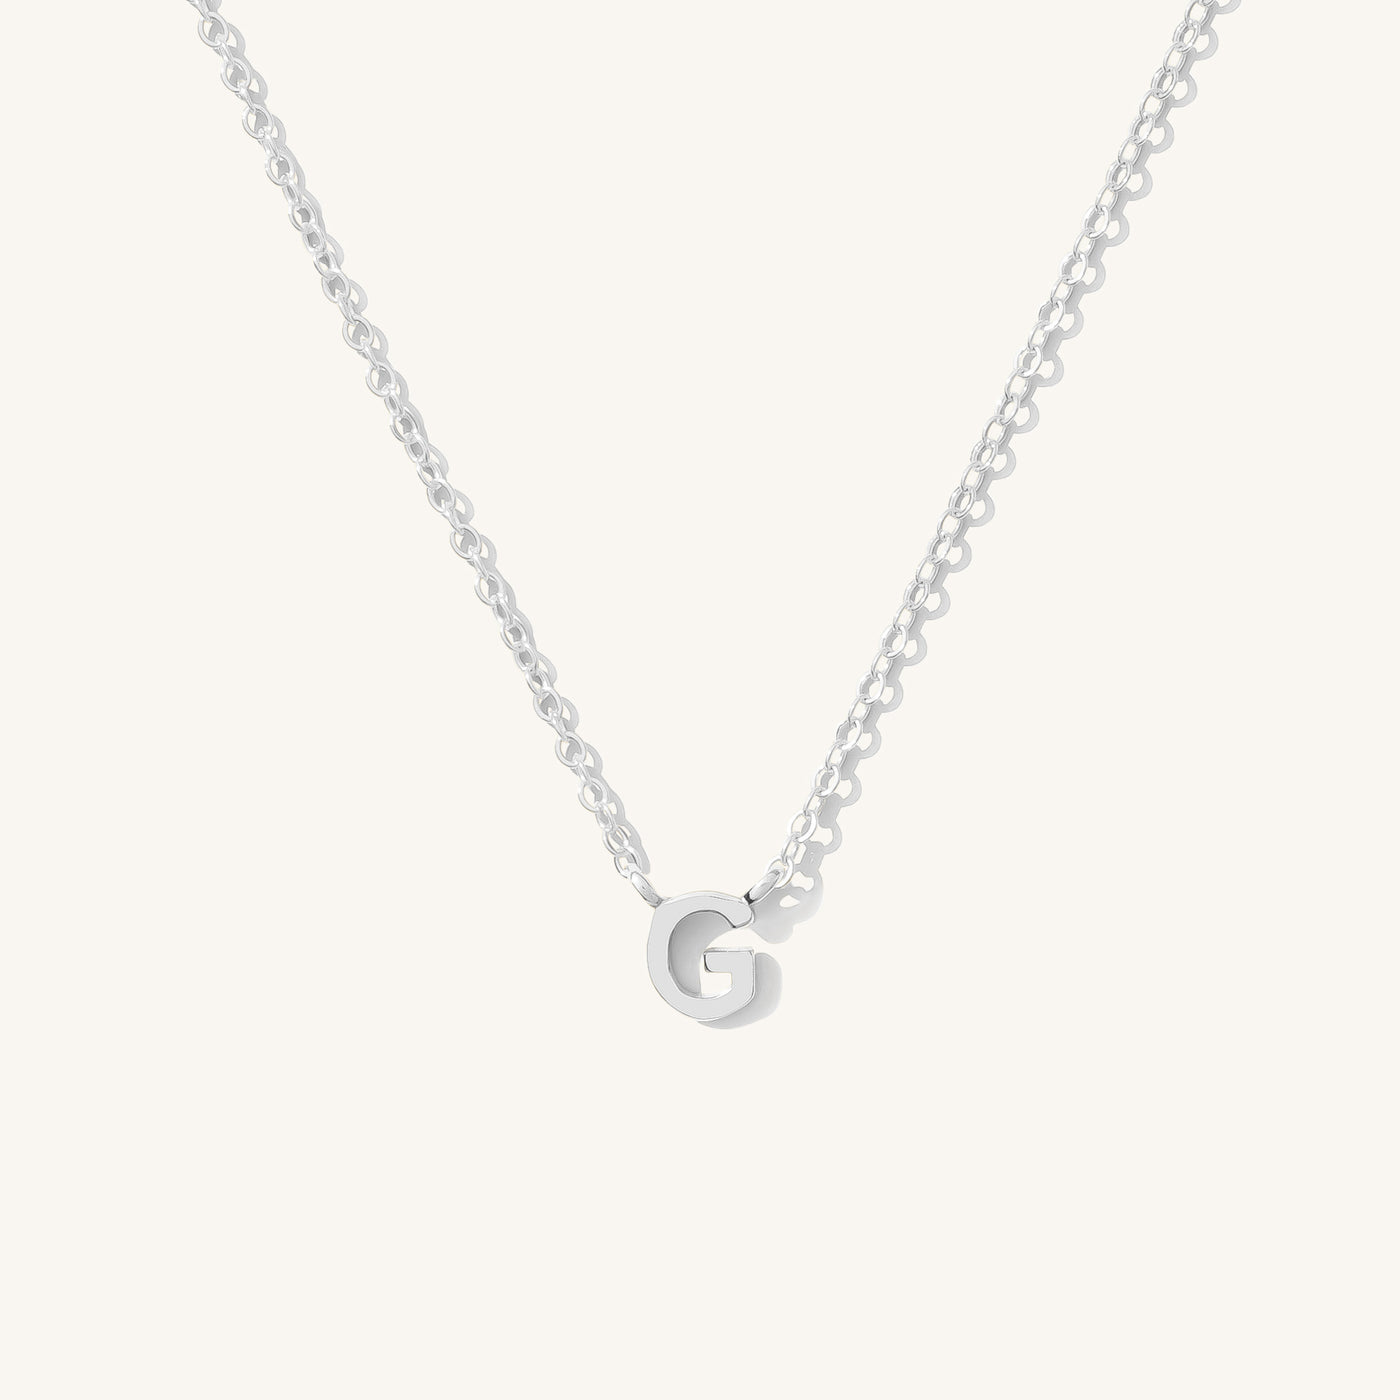 G Tiny Initial Necklace